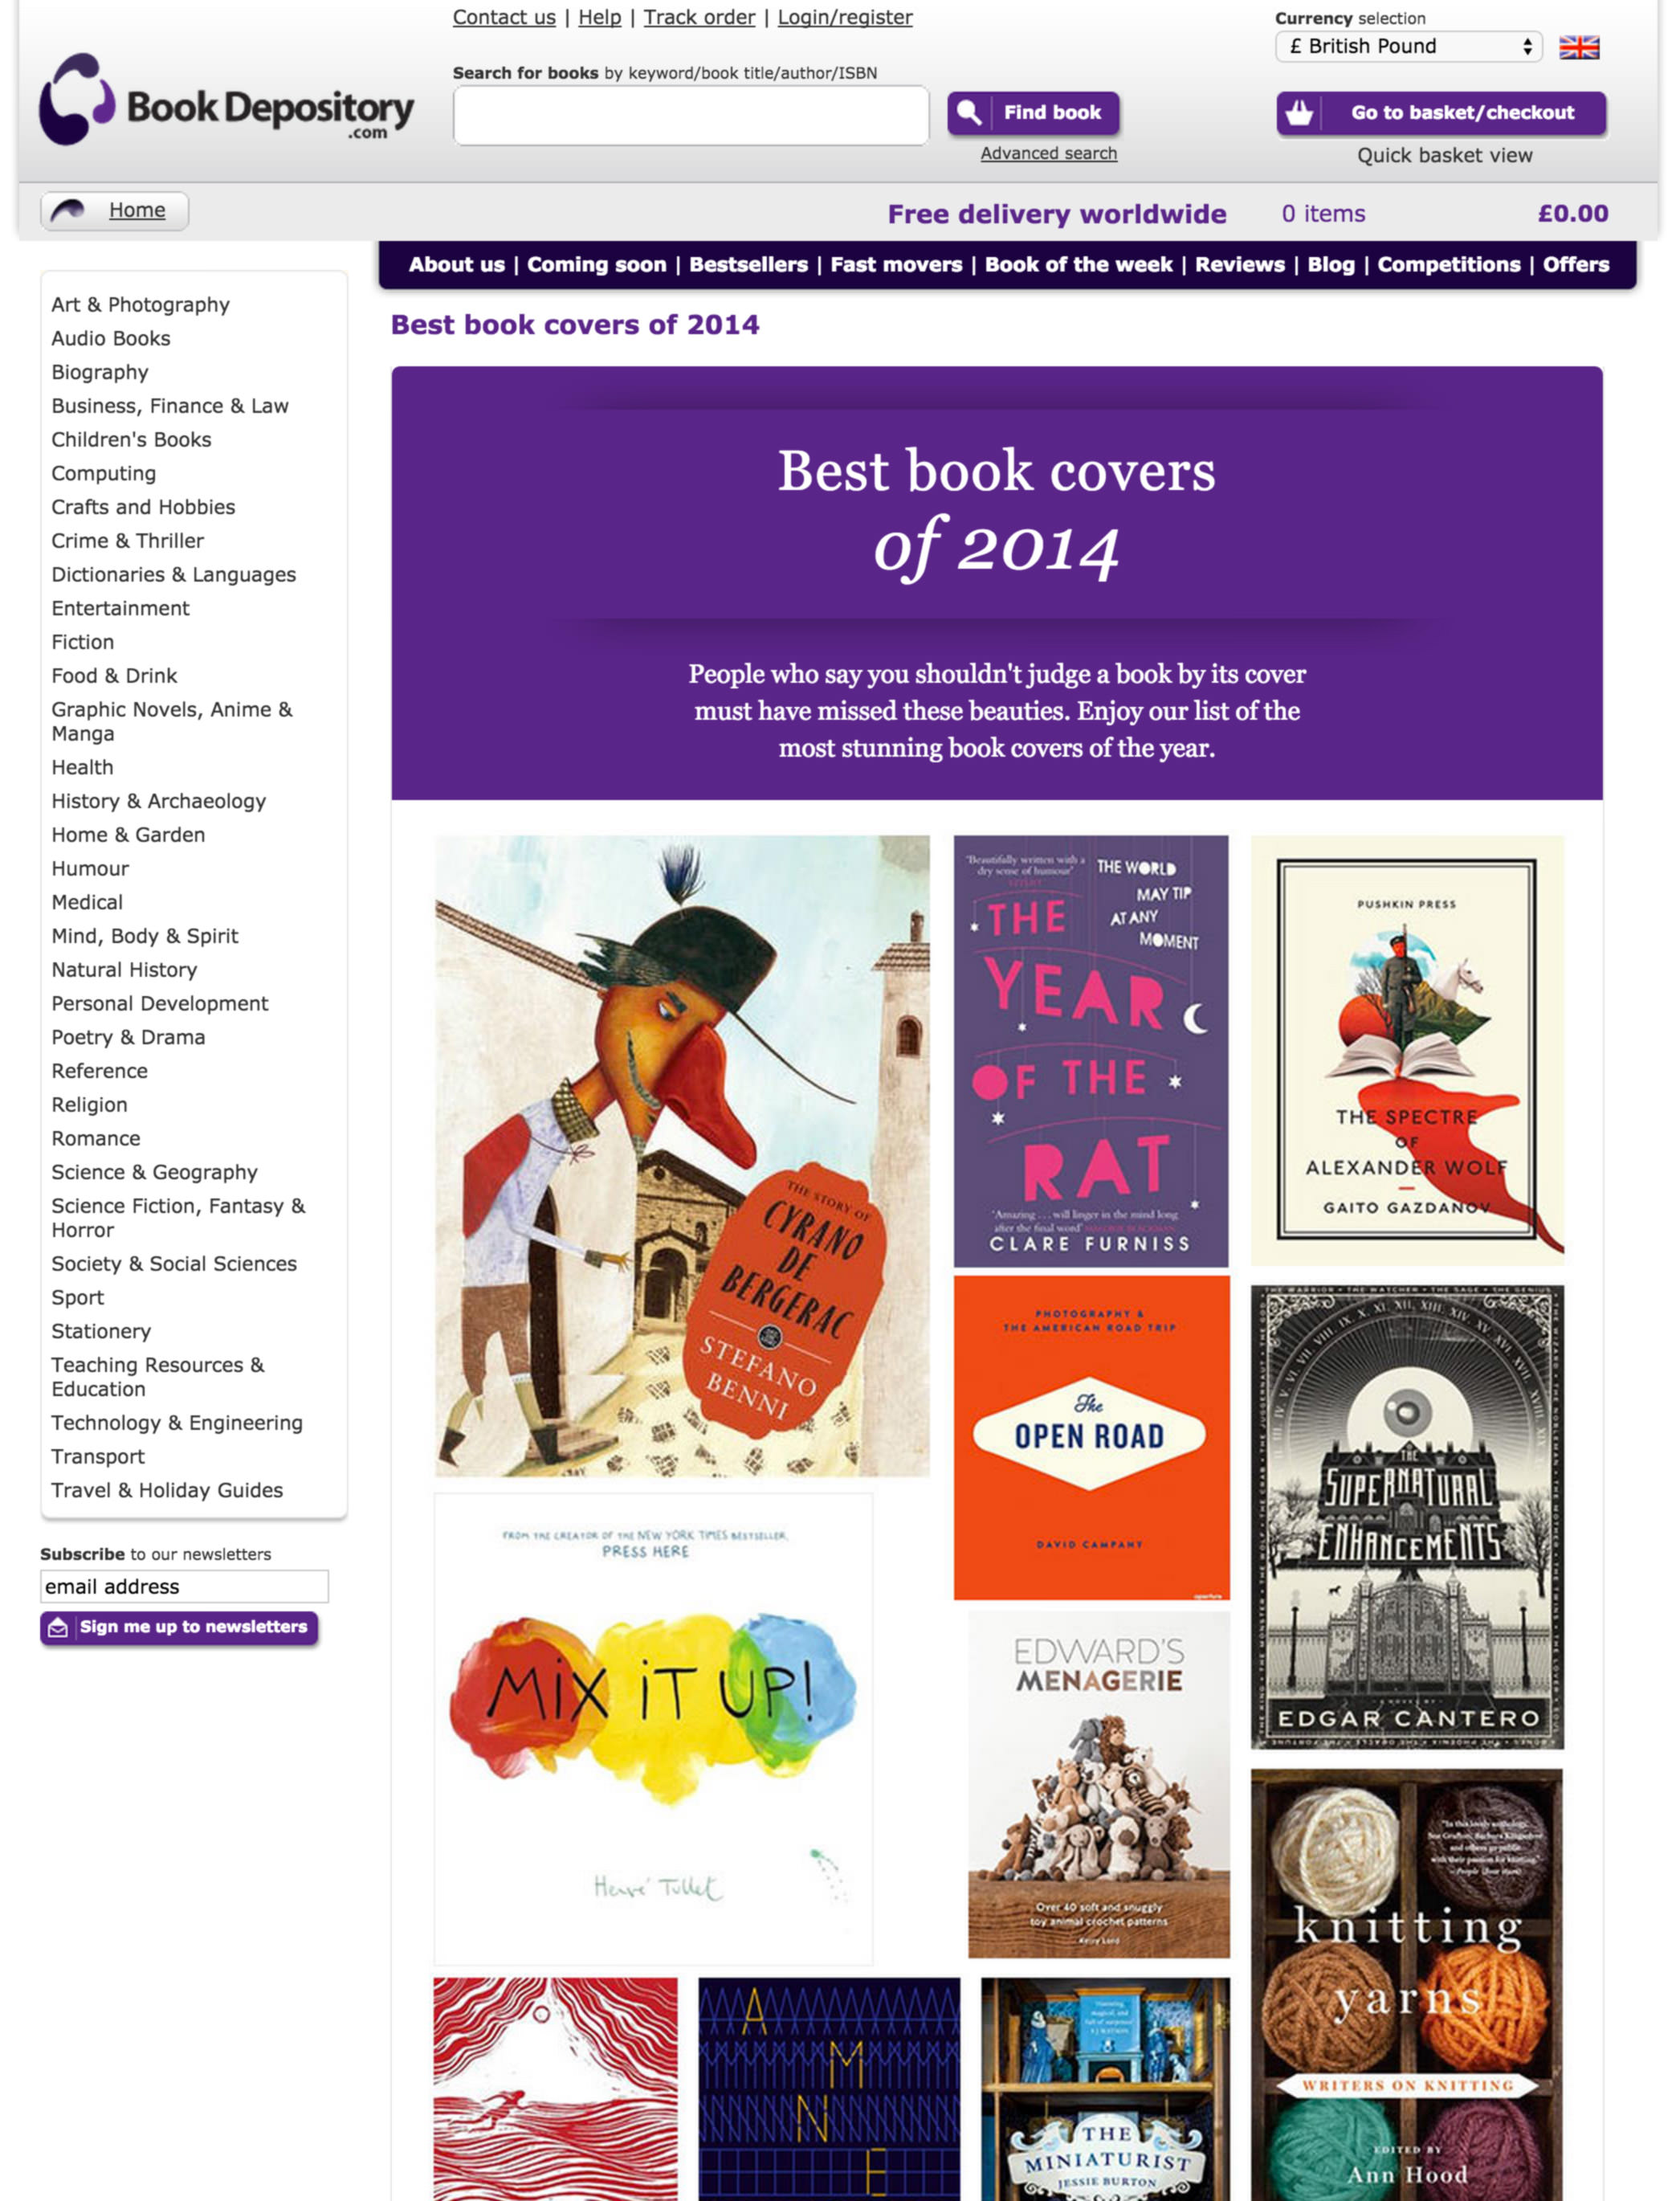 Best book covers landing page